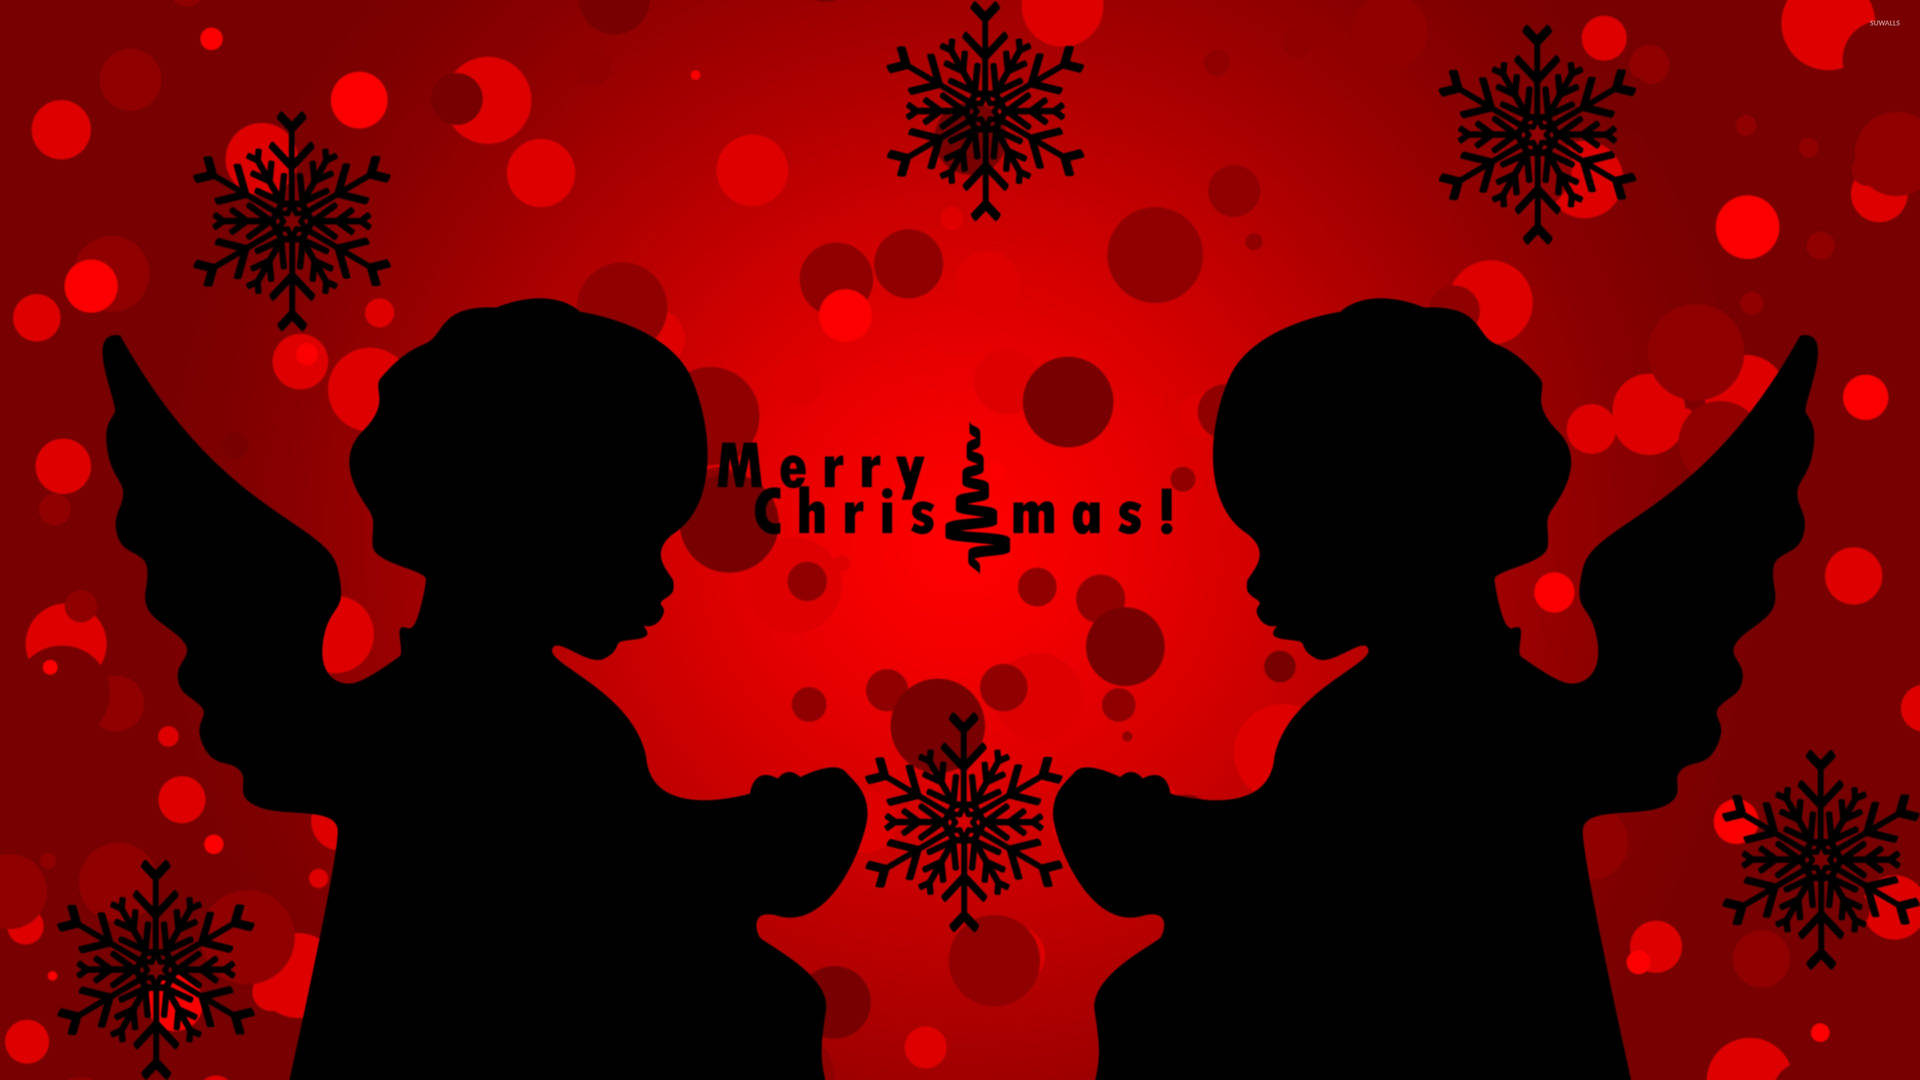 Christmas Angels Silhouette Wallpaper